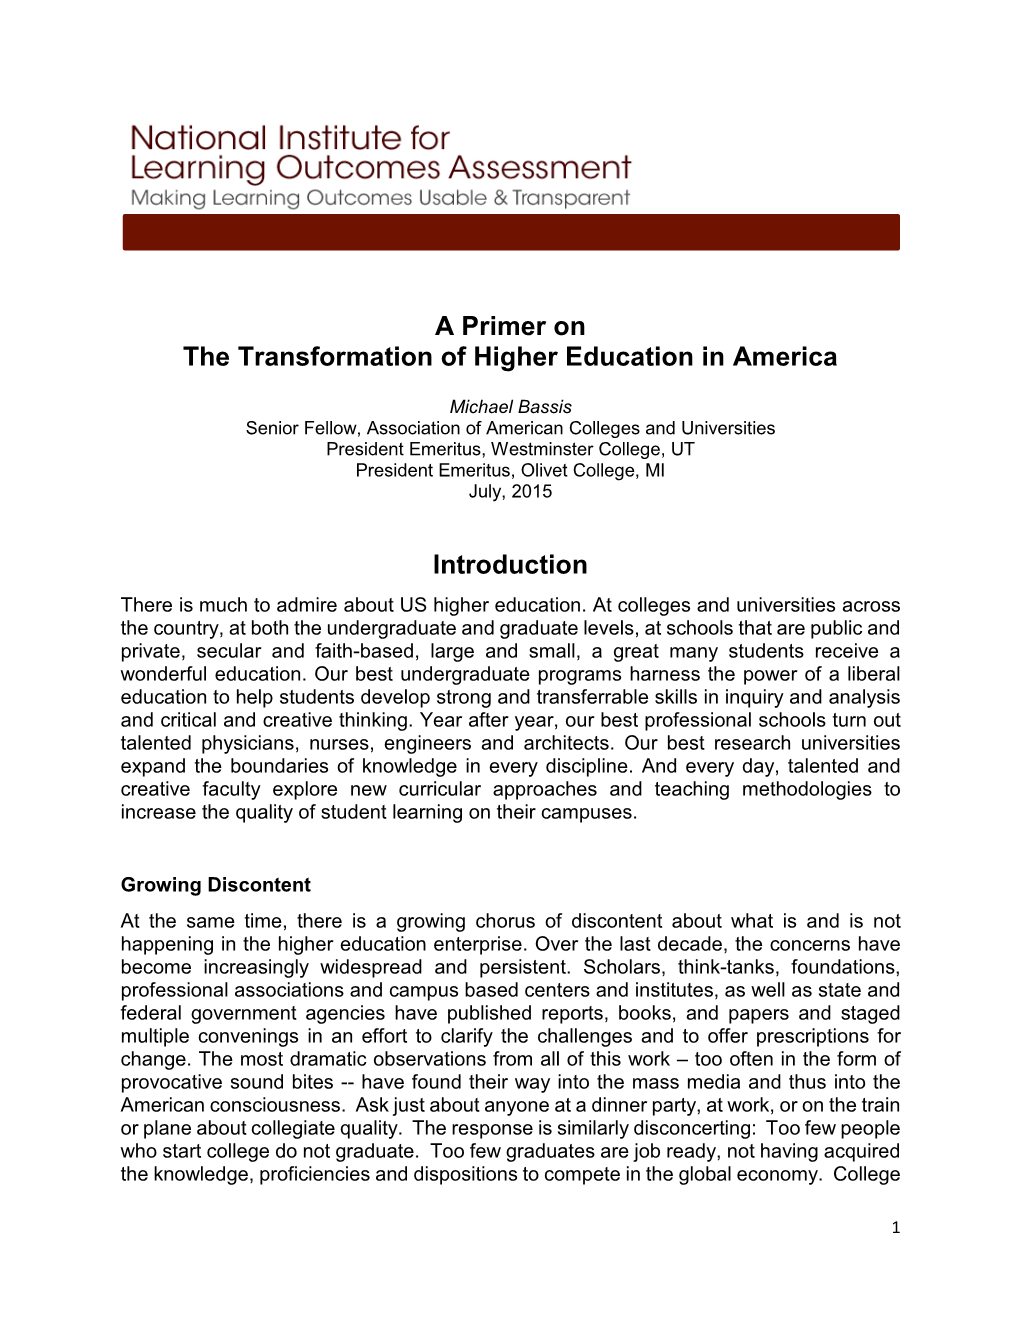 A Primer on the Transformation of Higher Education in America